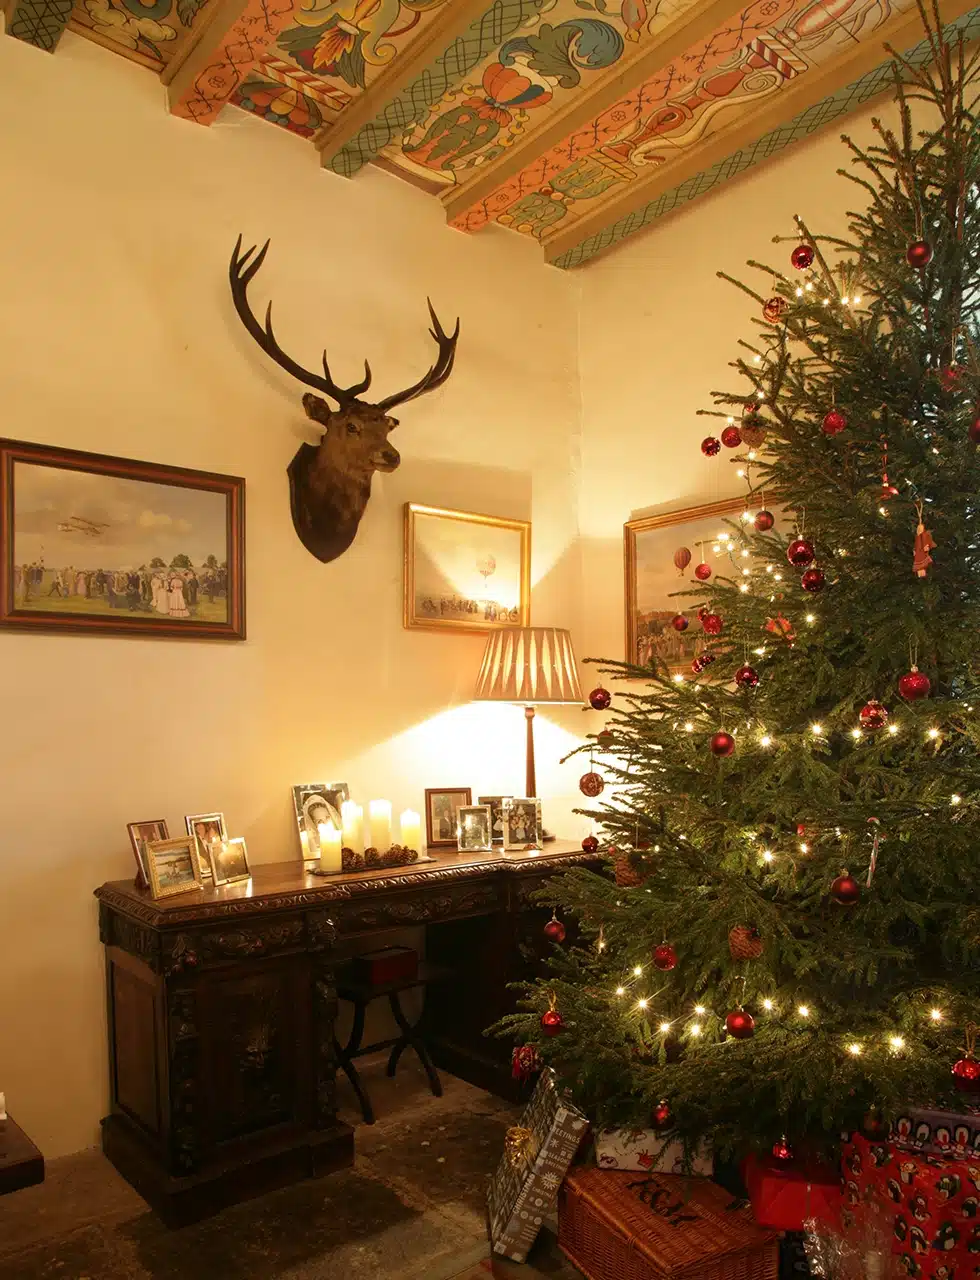 A Christmas tree setting in a Scottish highland castle as designed by katharine pooley